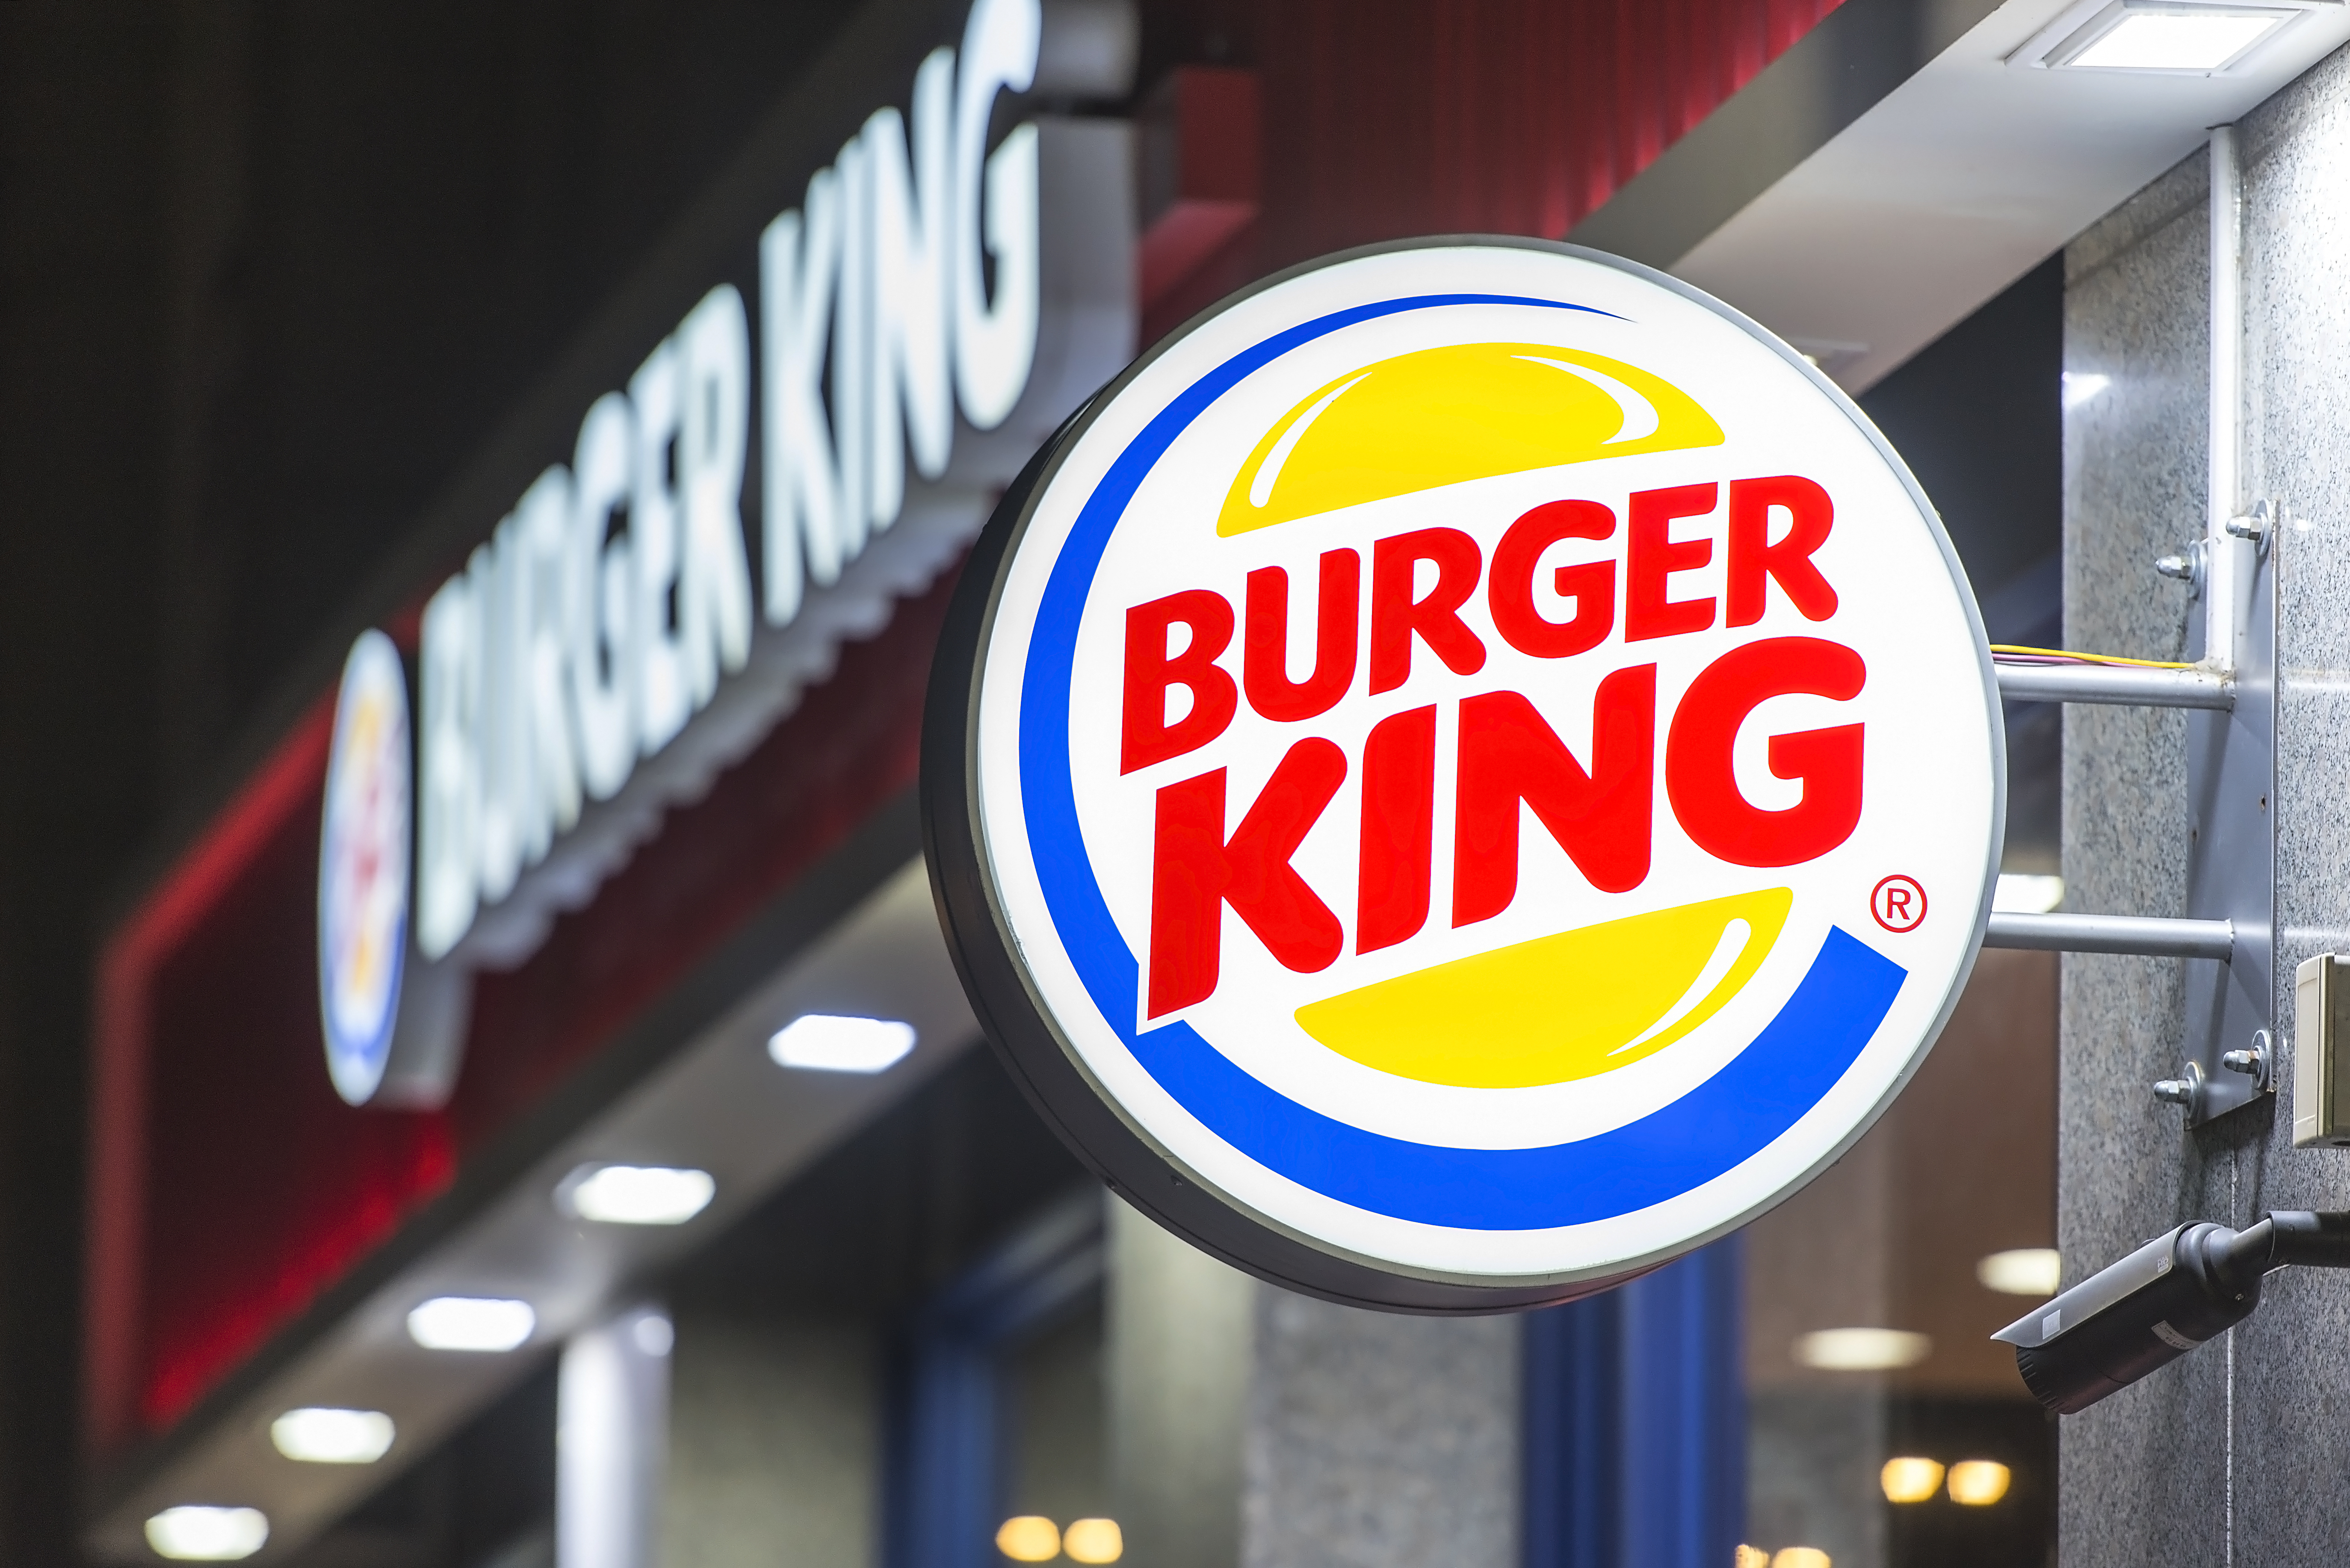 Burger King sign illuminated in foreground, with restaurant in background.